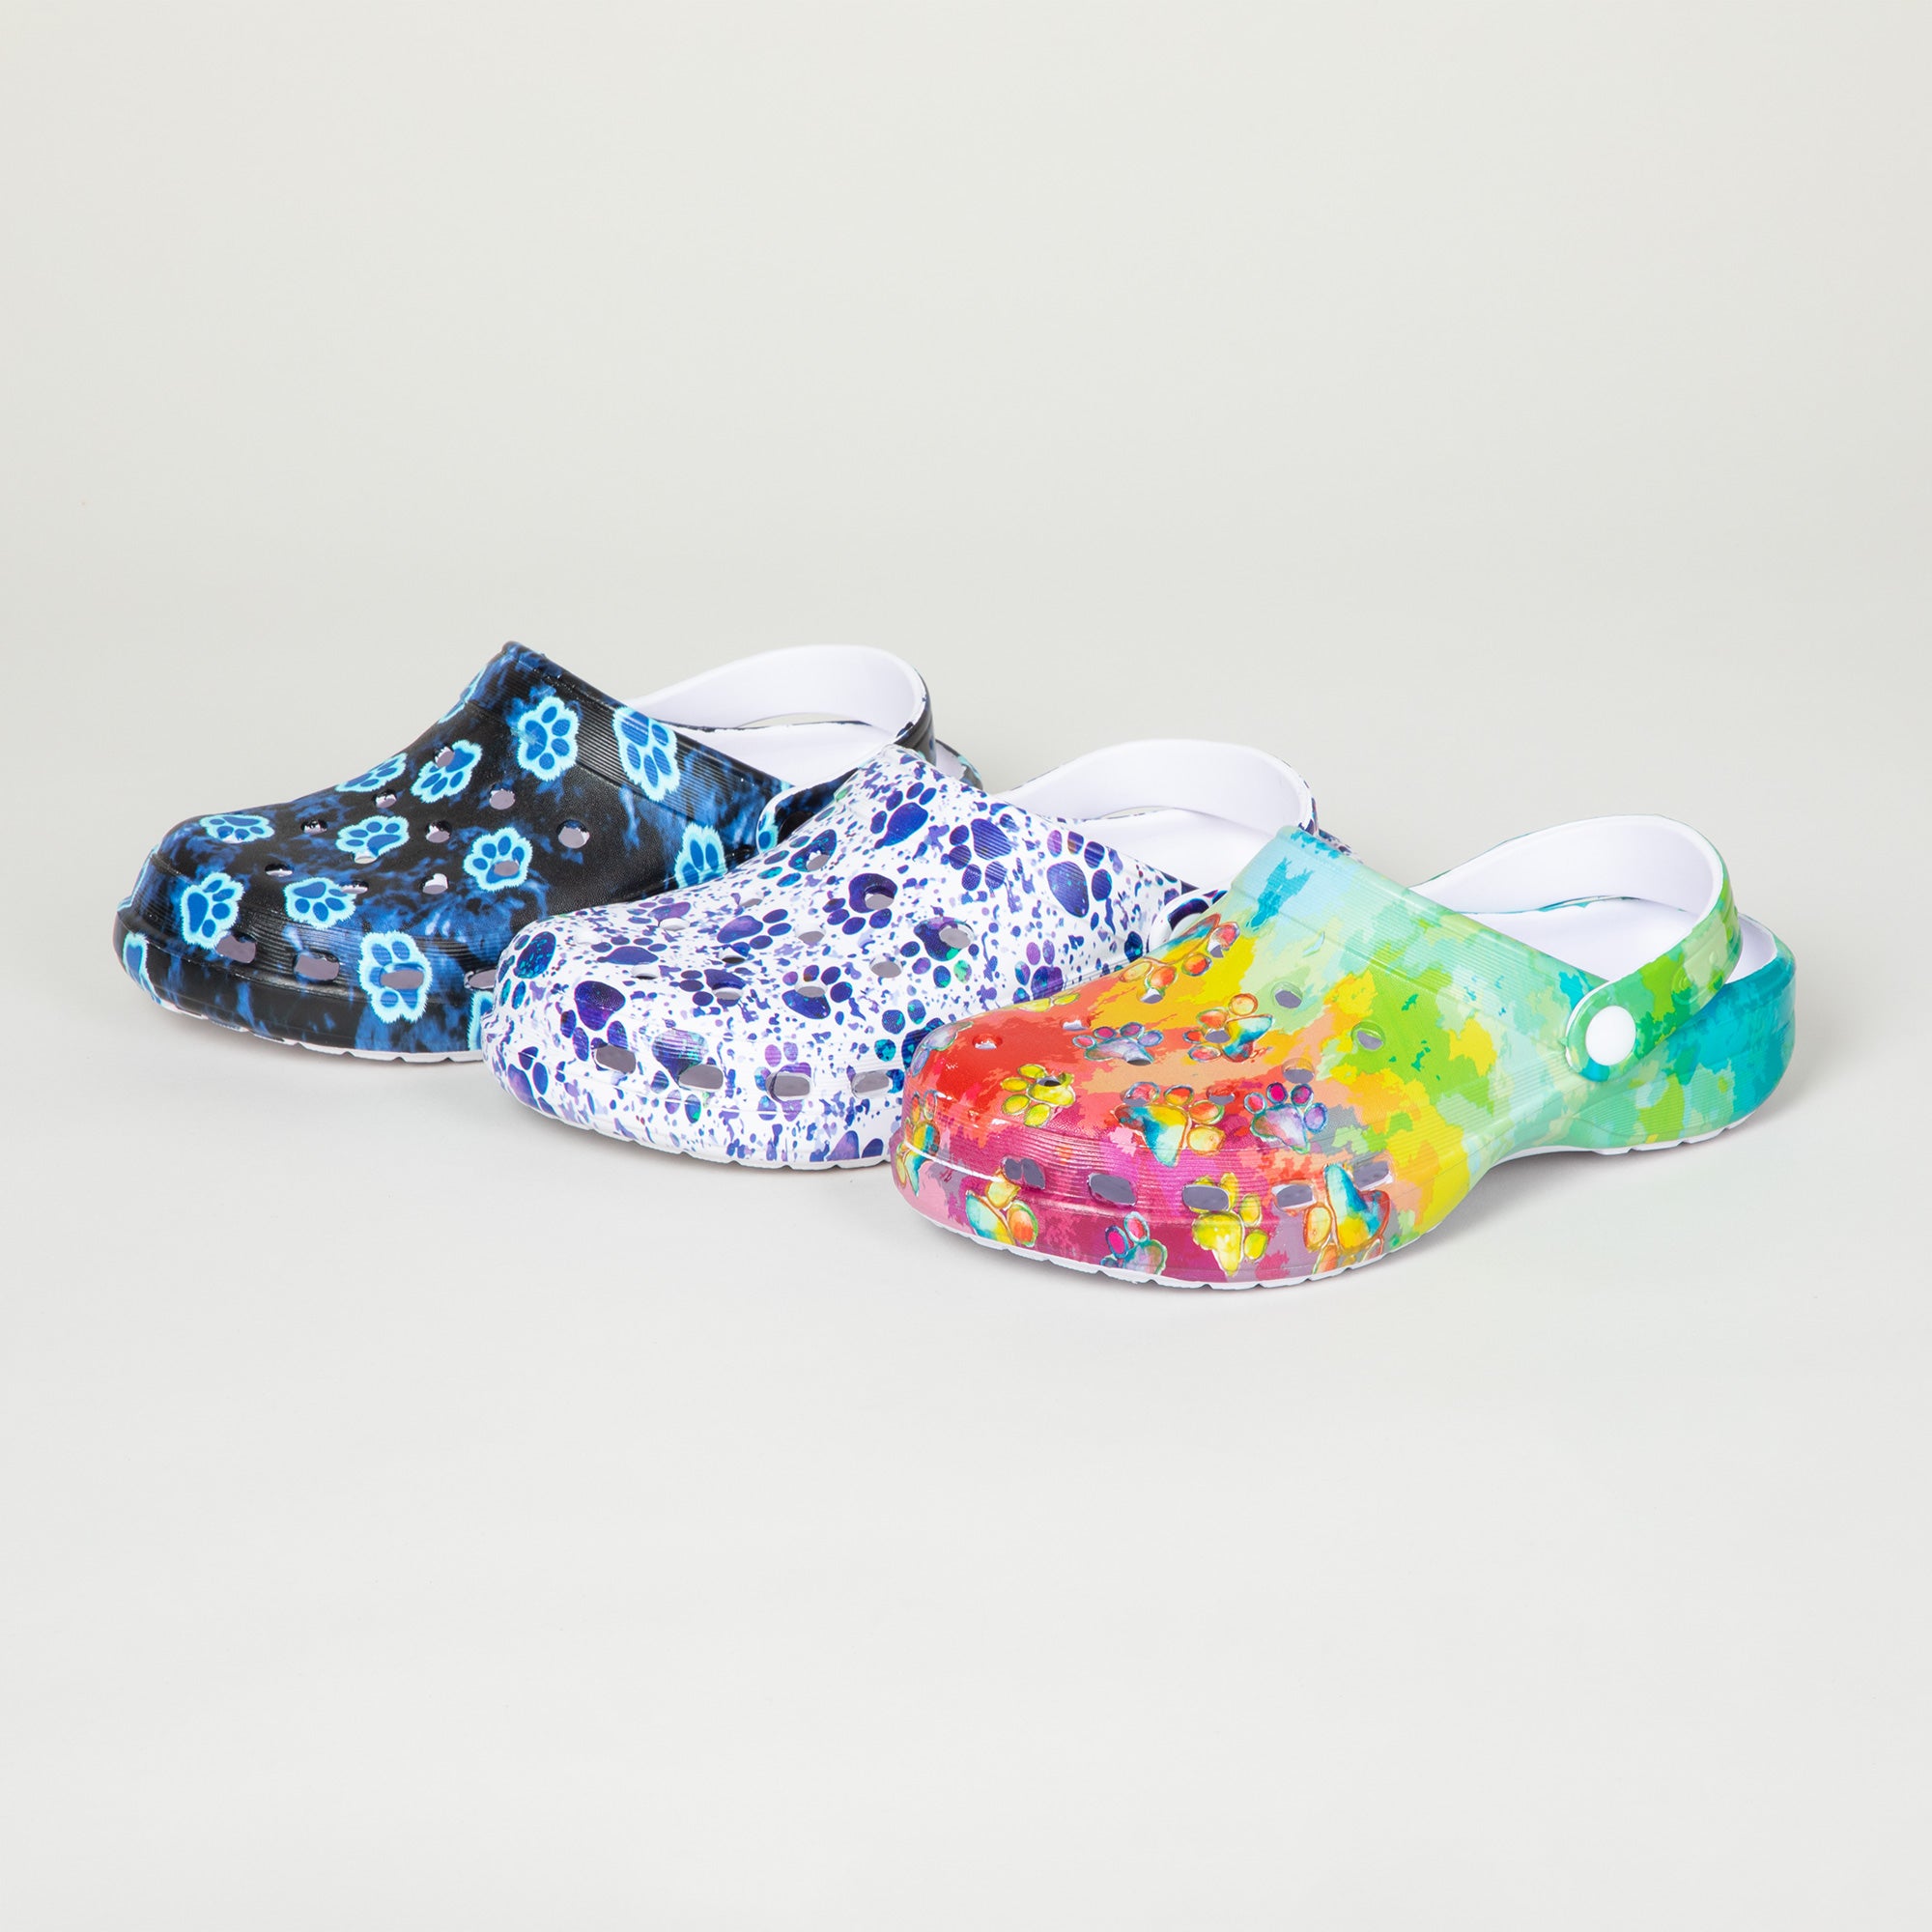 Super Comfy Paw Print Clogs - Rainbow Marble Paws - 8